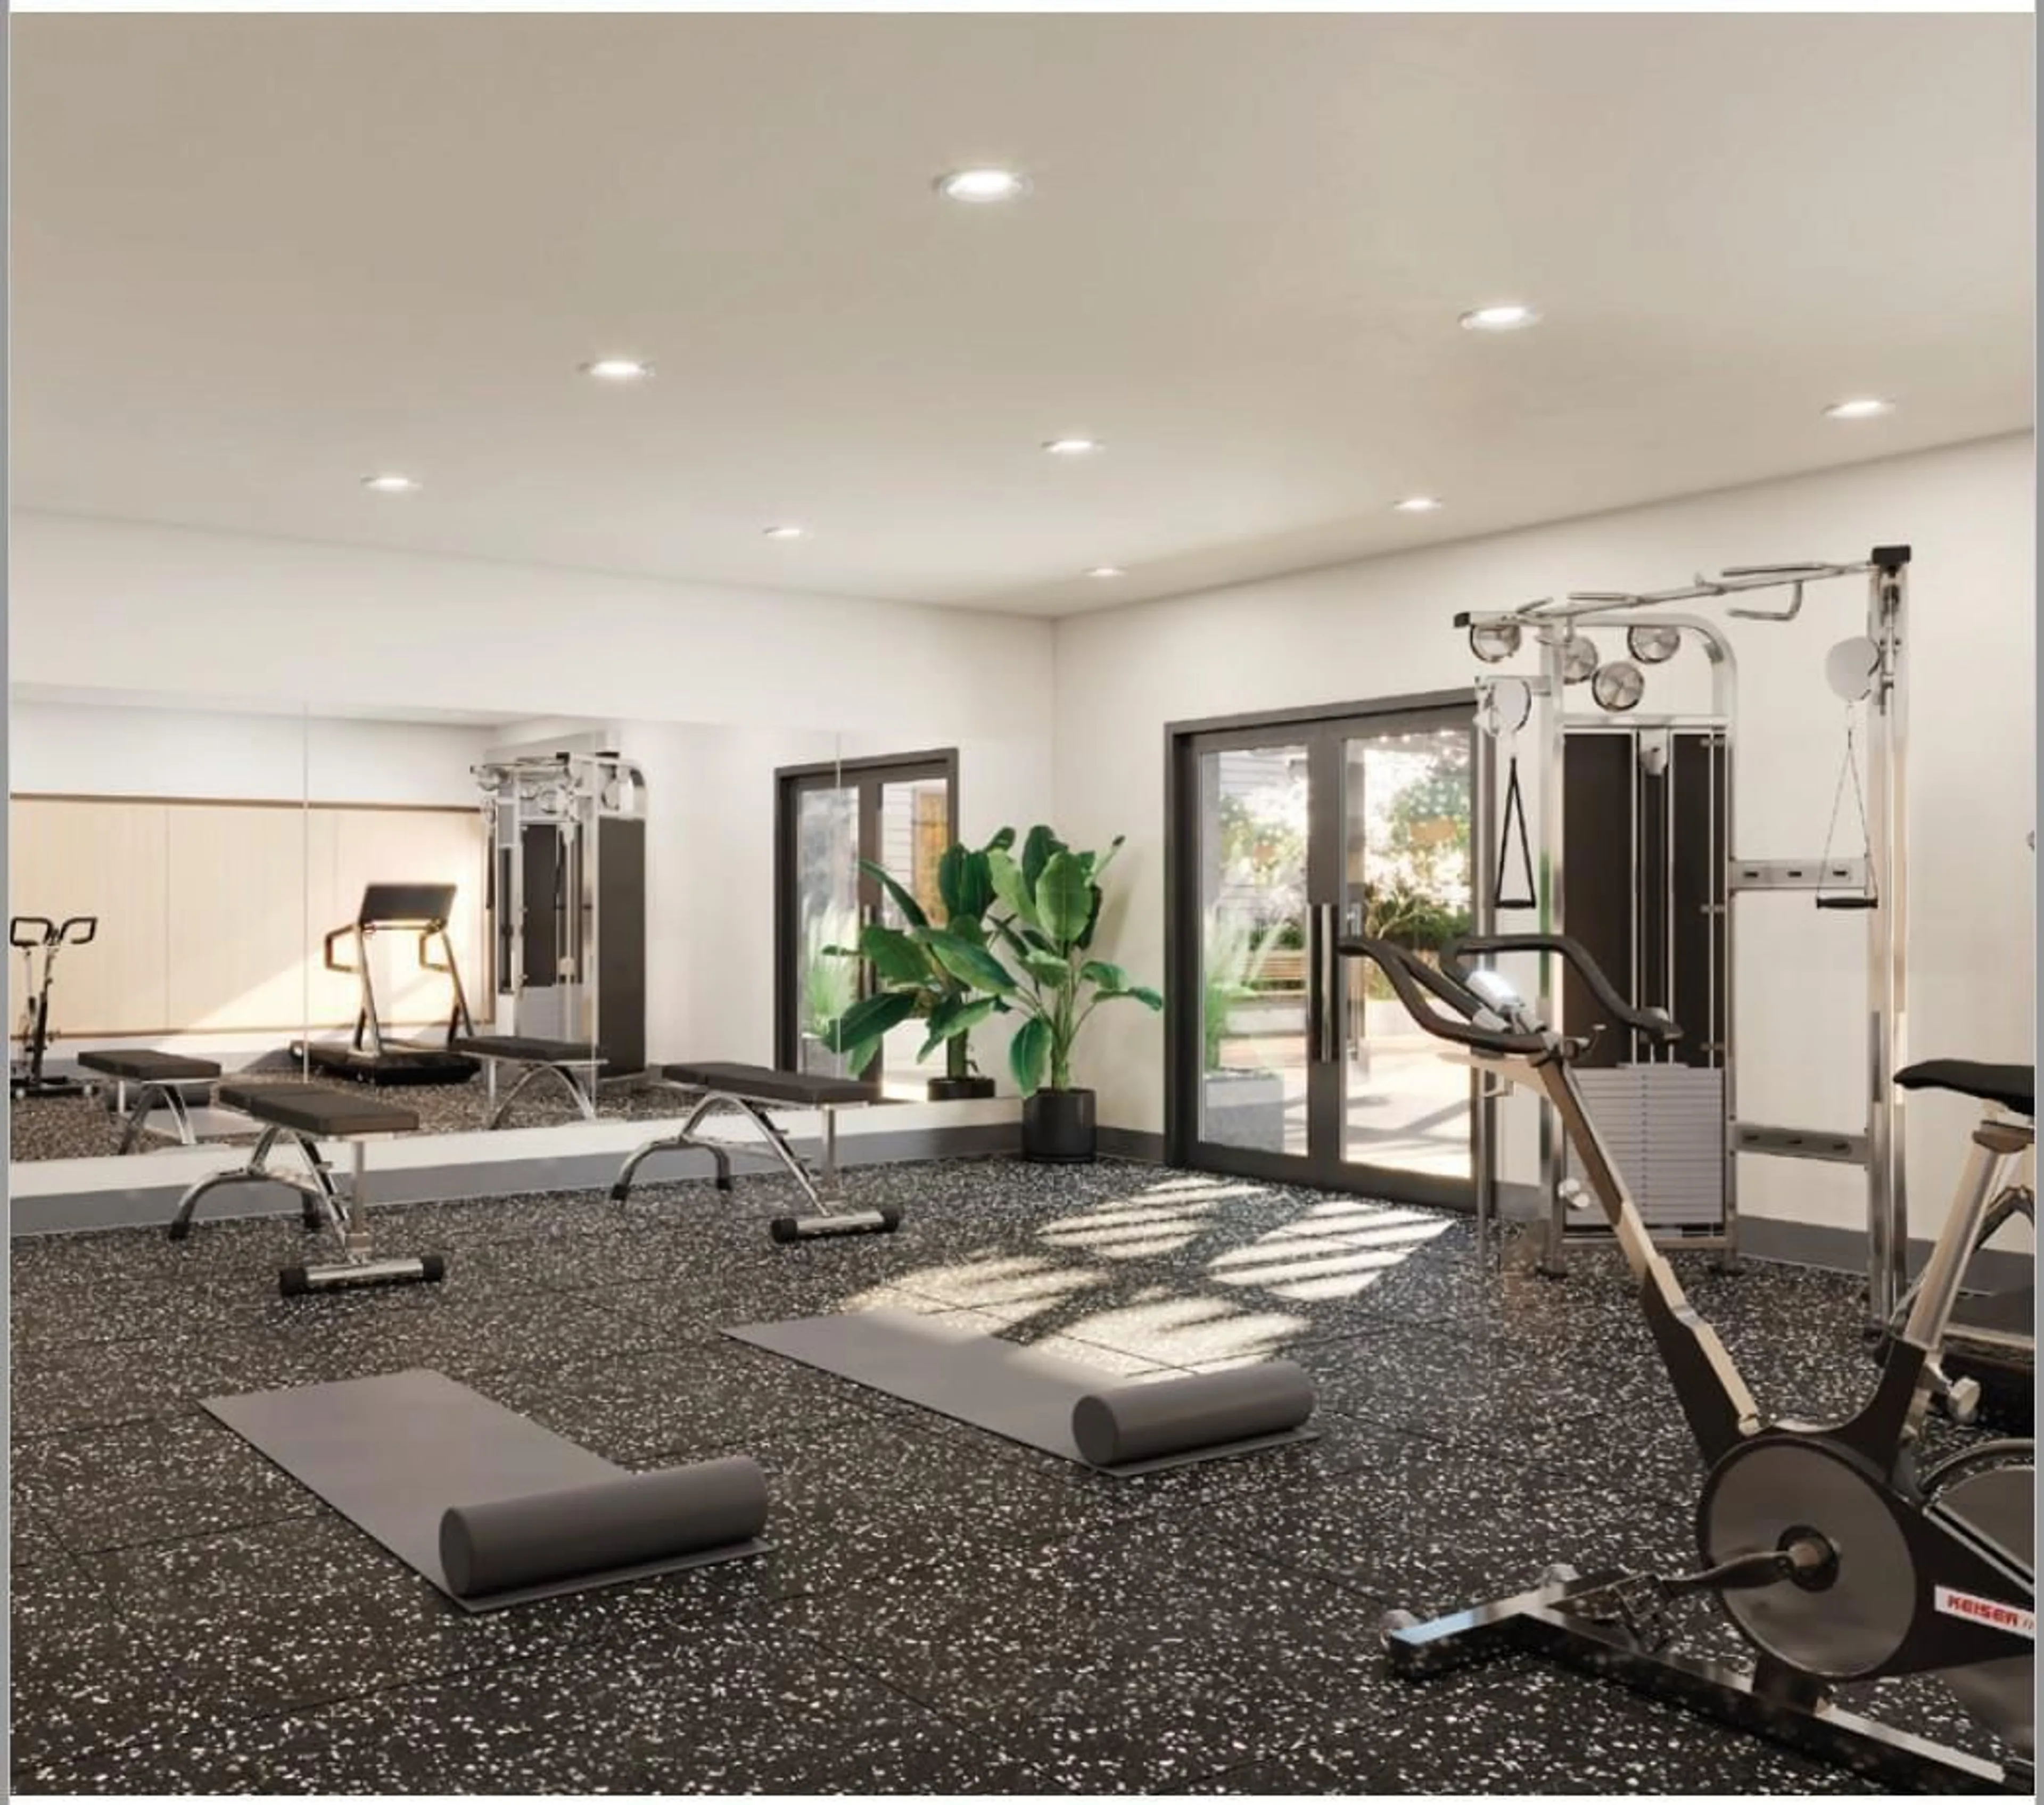 Gym or fitness room for 414 10778 138 STREET, Surrey British Columbia V3T4K8